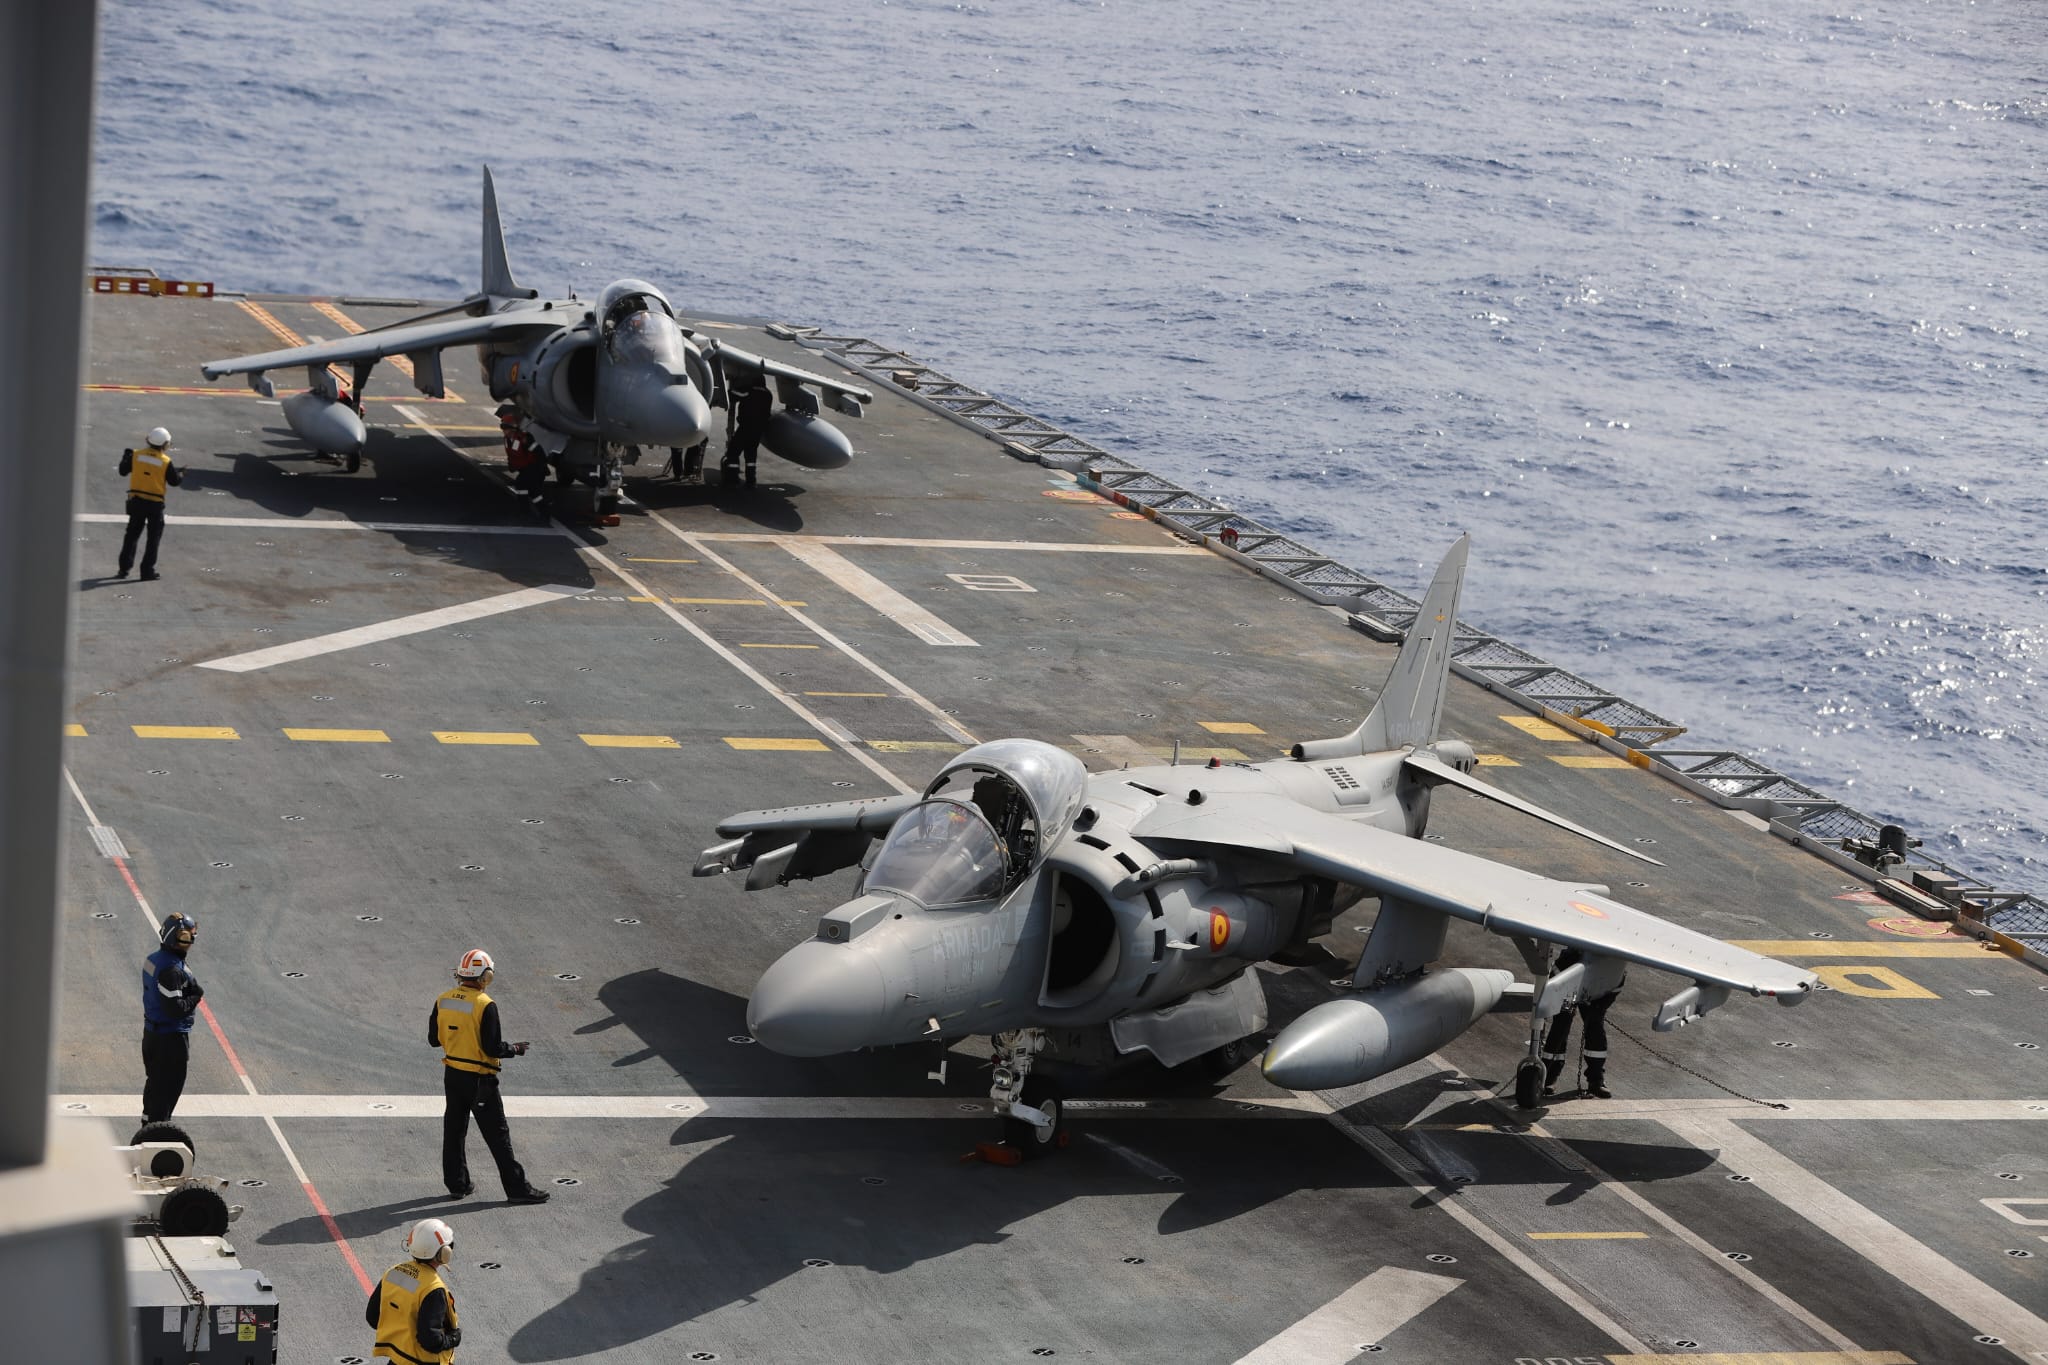 'Harrier' are a fundamental part of the 'Daedalus' group